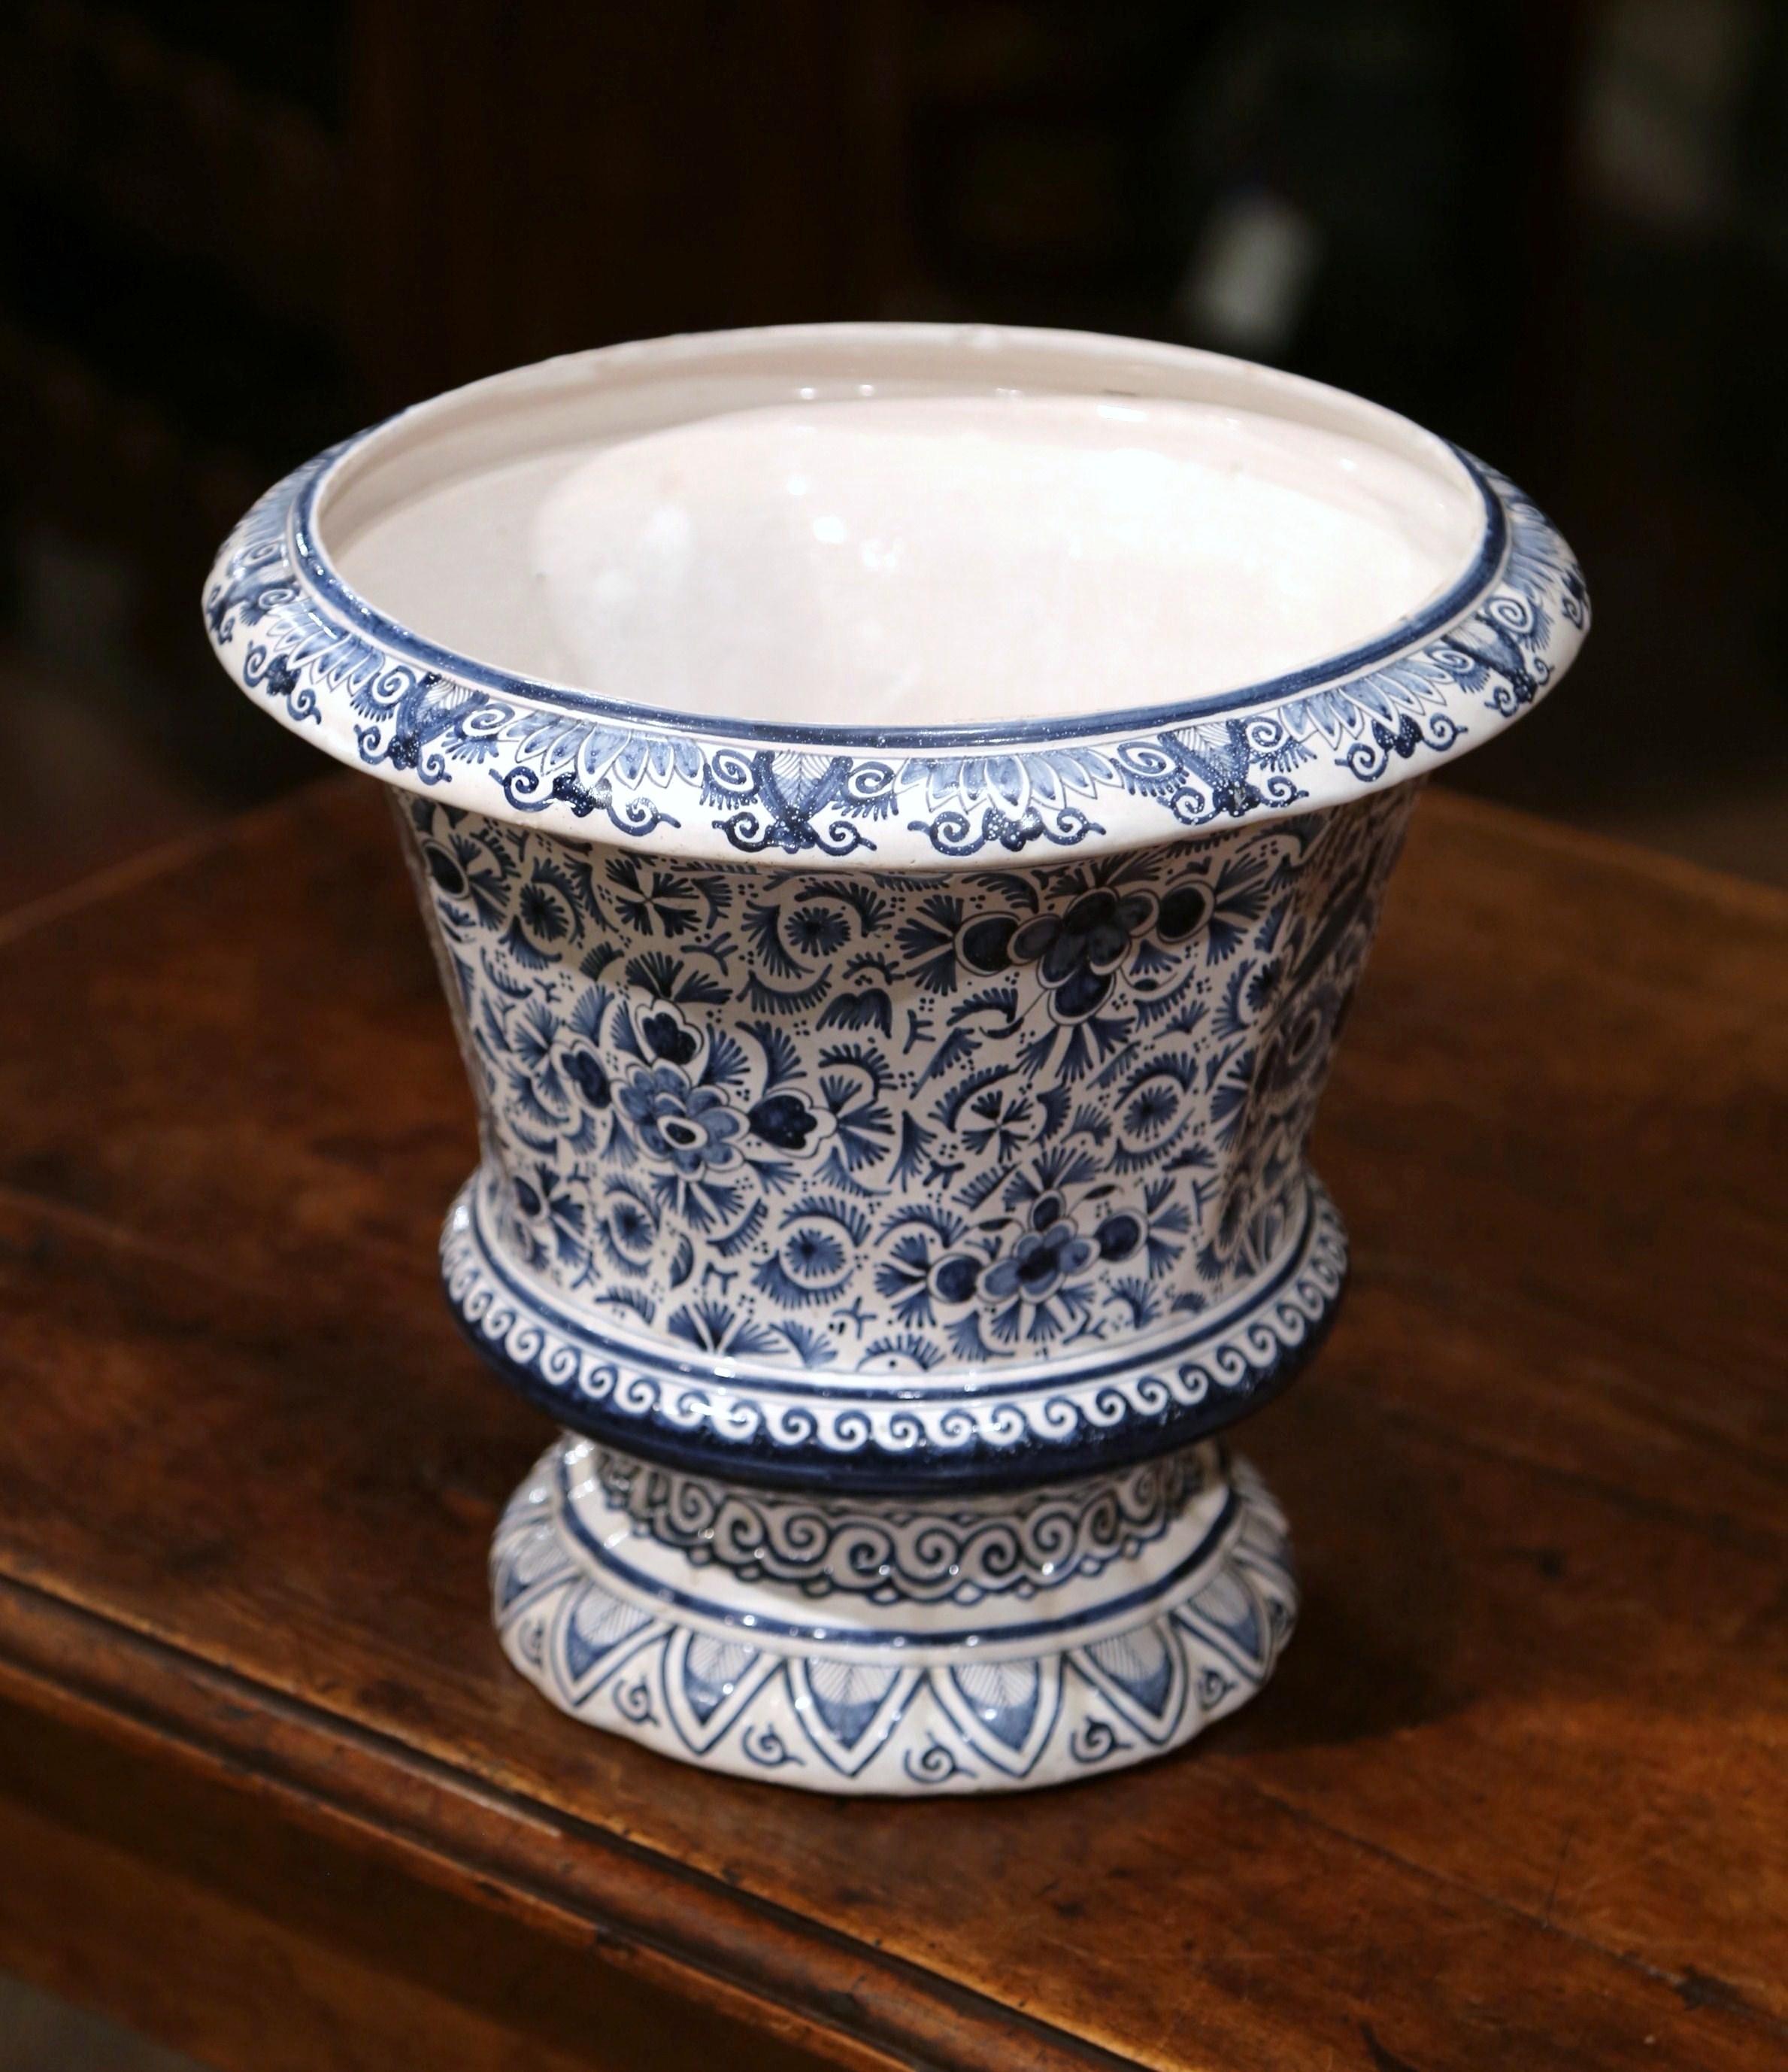 The traditional Classic antique ceramic planter was crafted in France, circa 1870; round in shape, the large faience vase has a wide mouth at the top, a beveled lip, and is hand painted with detailed floral and bird motifs in a blue and white